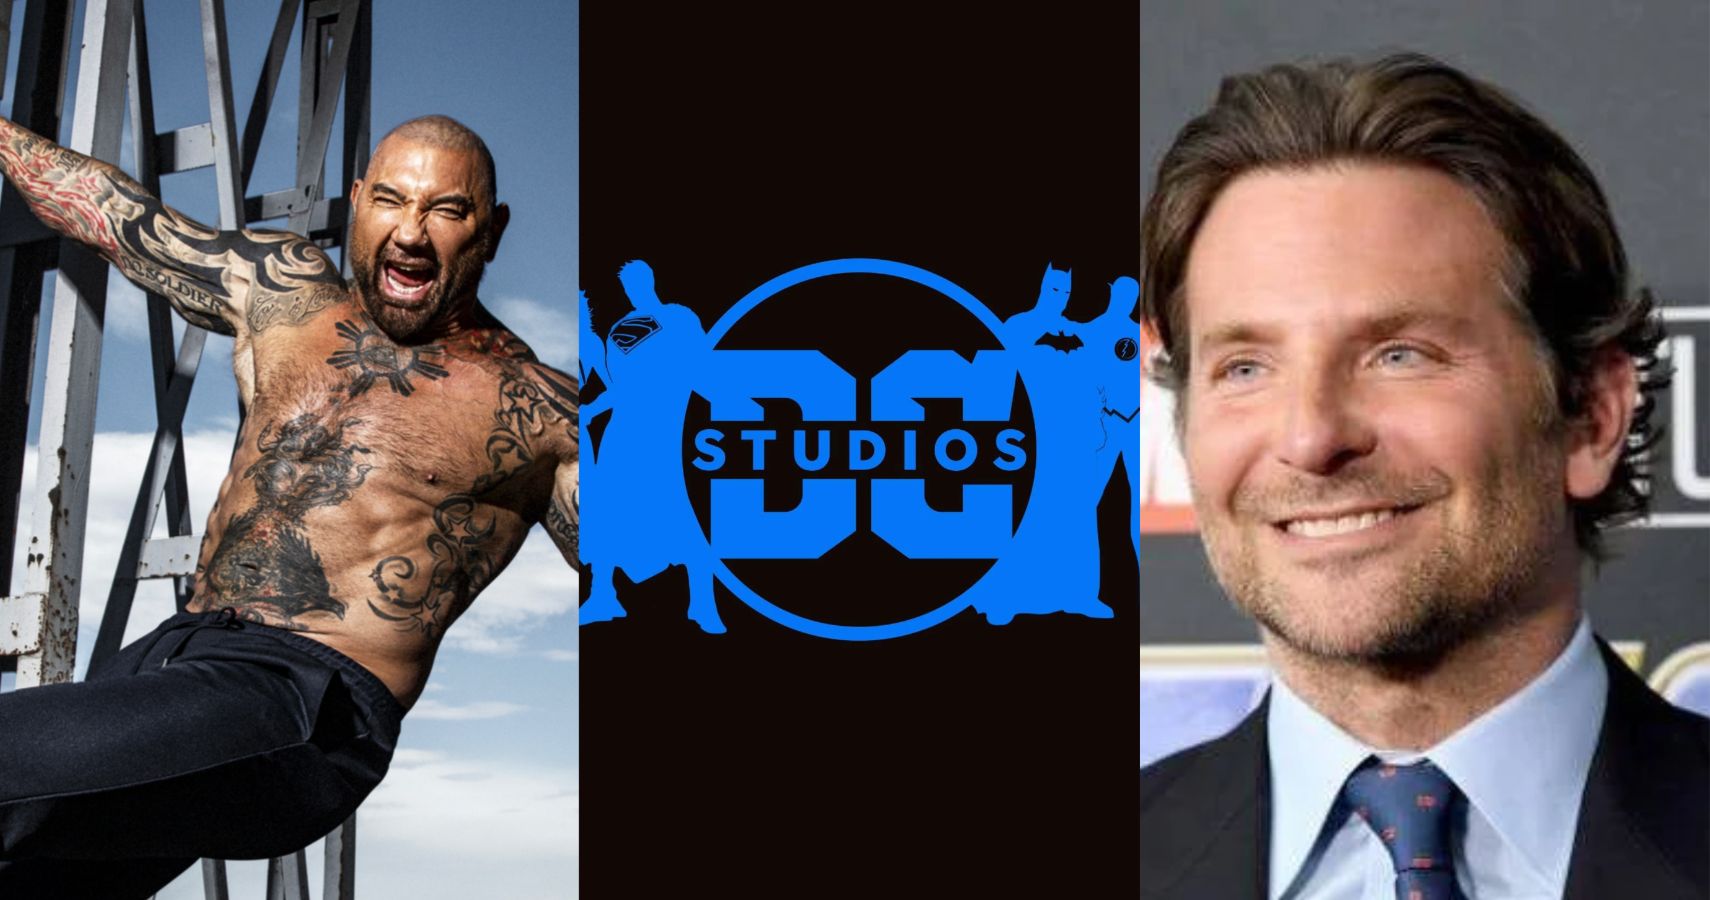 A combined image featuring Guardians of the Galaxy actors like Dave Bautista and Bradley Cooper on either side of the DC Studios logo. 